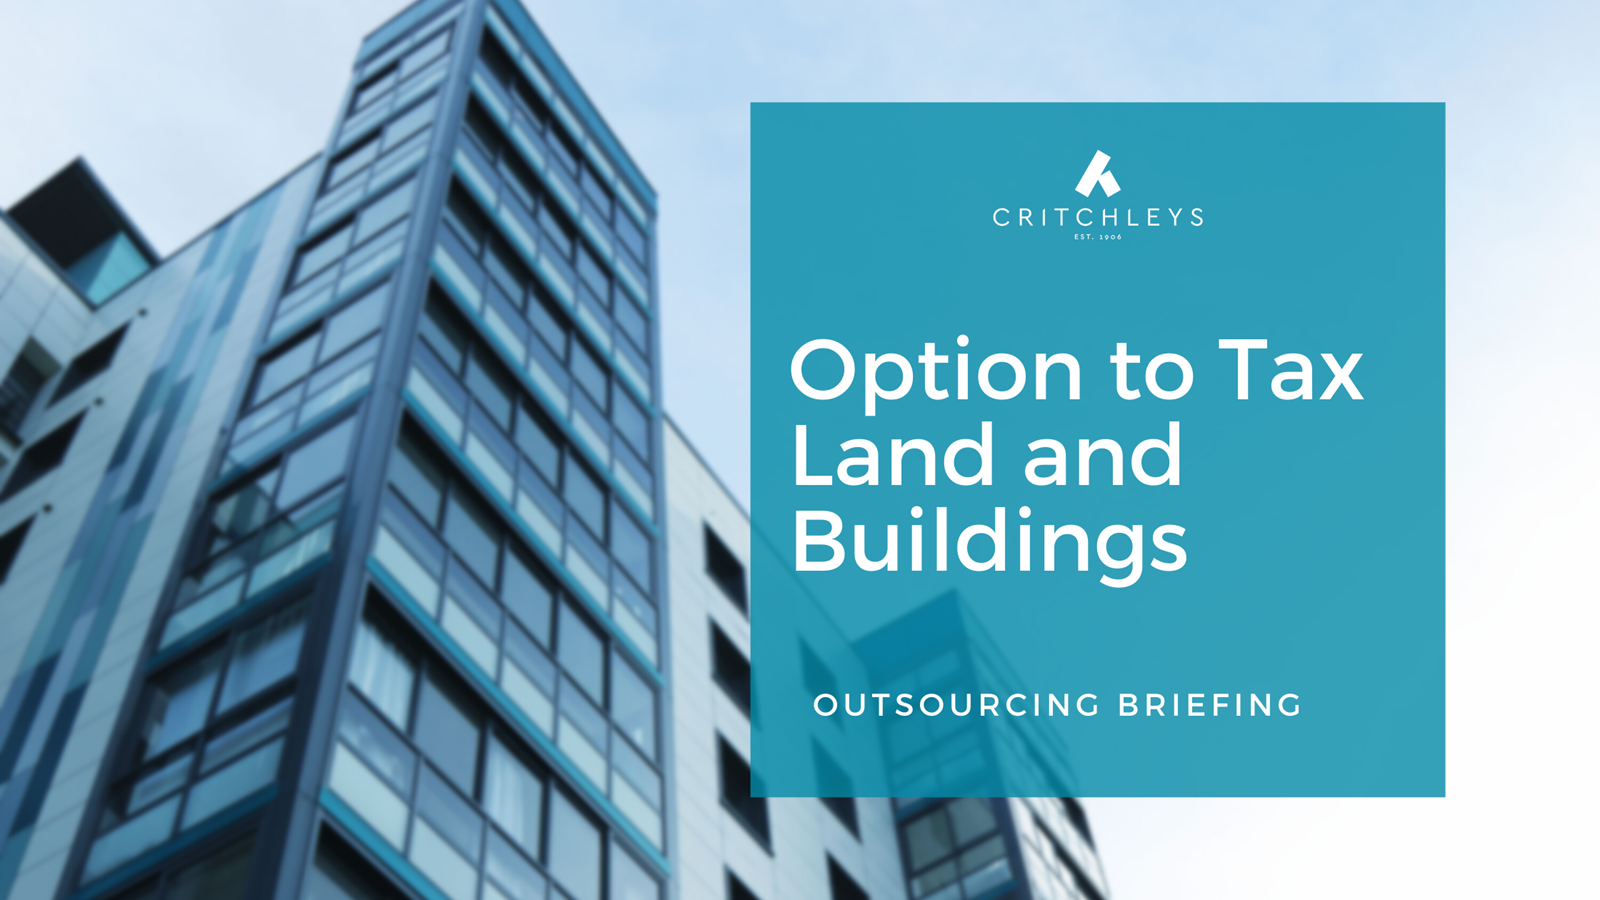 Option to Tax Land and Buildings